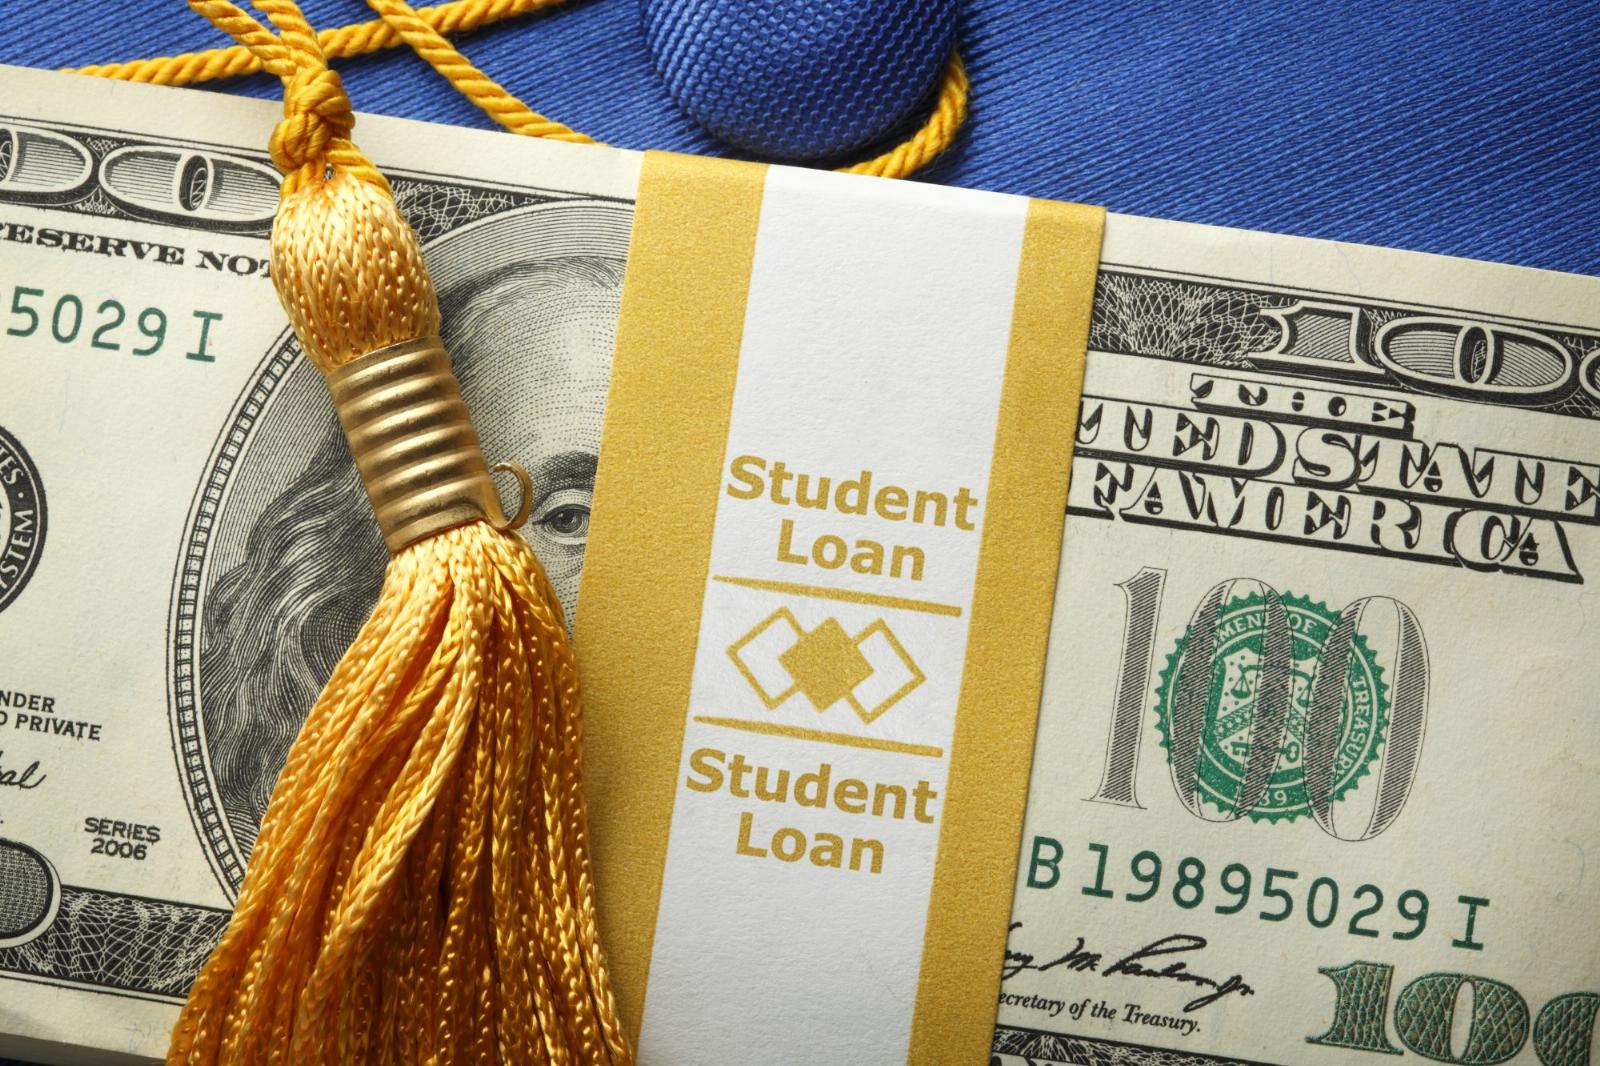 Summer’s student debt repayment tools continue blooming with $6M Series A extension